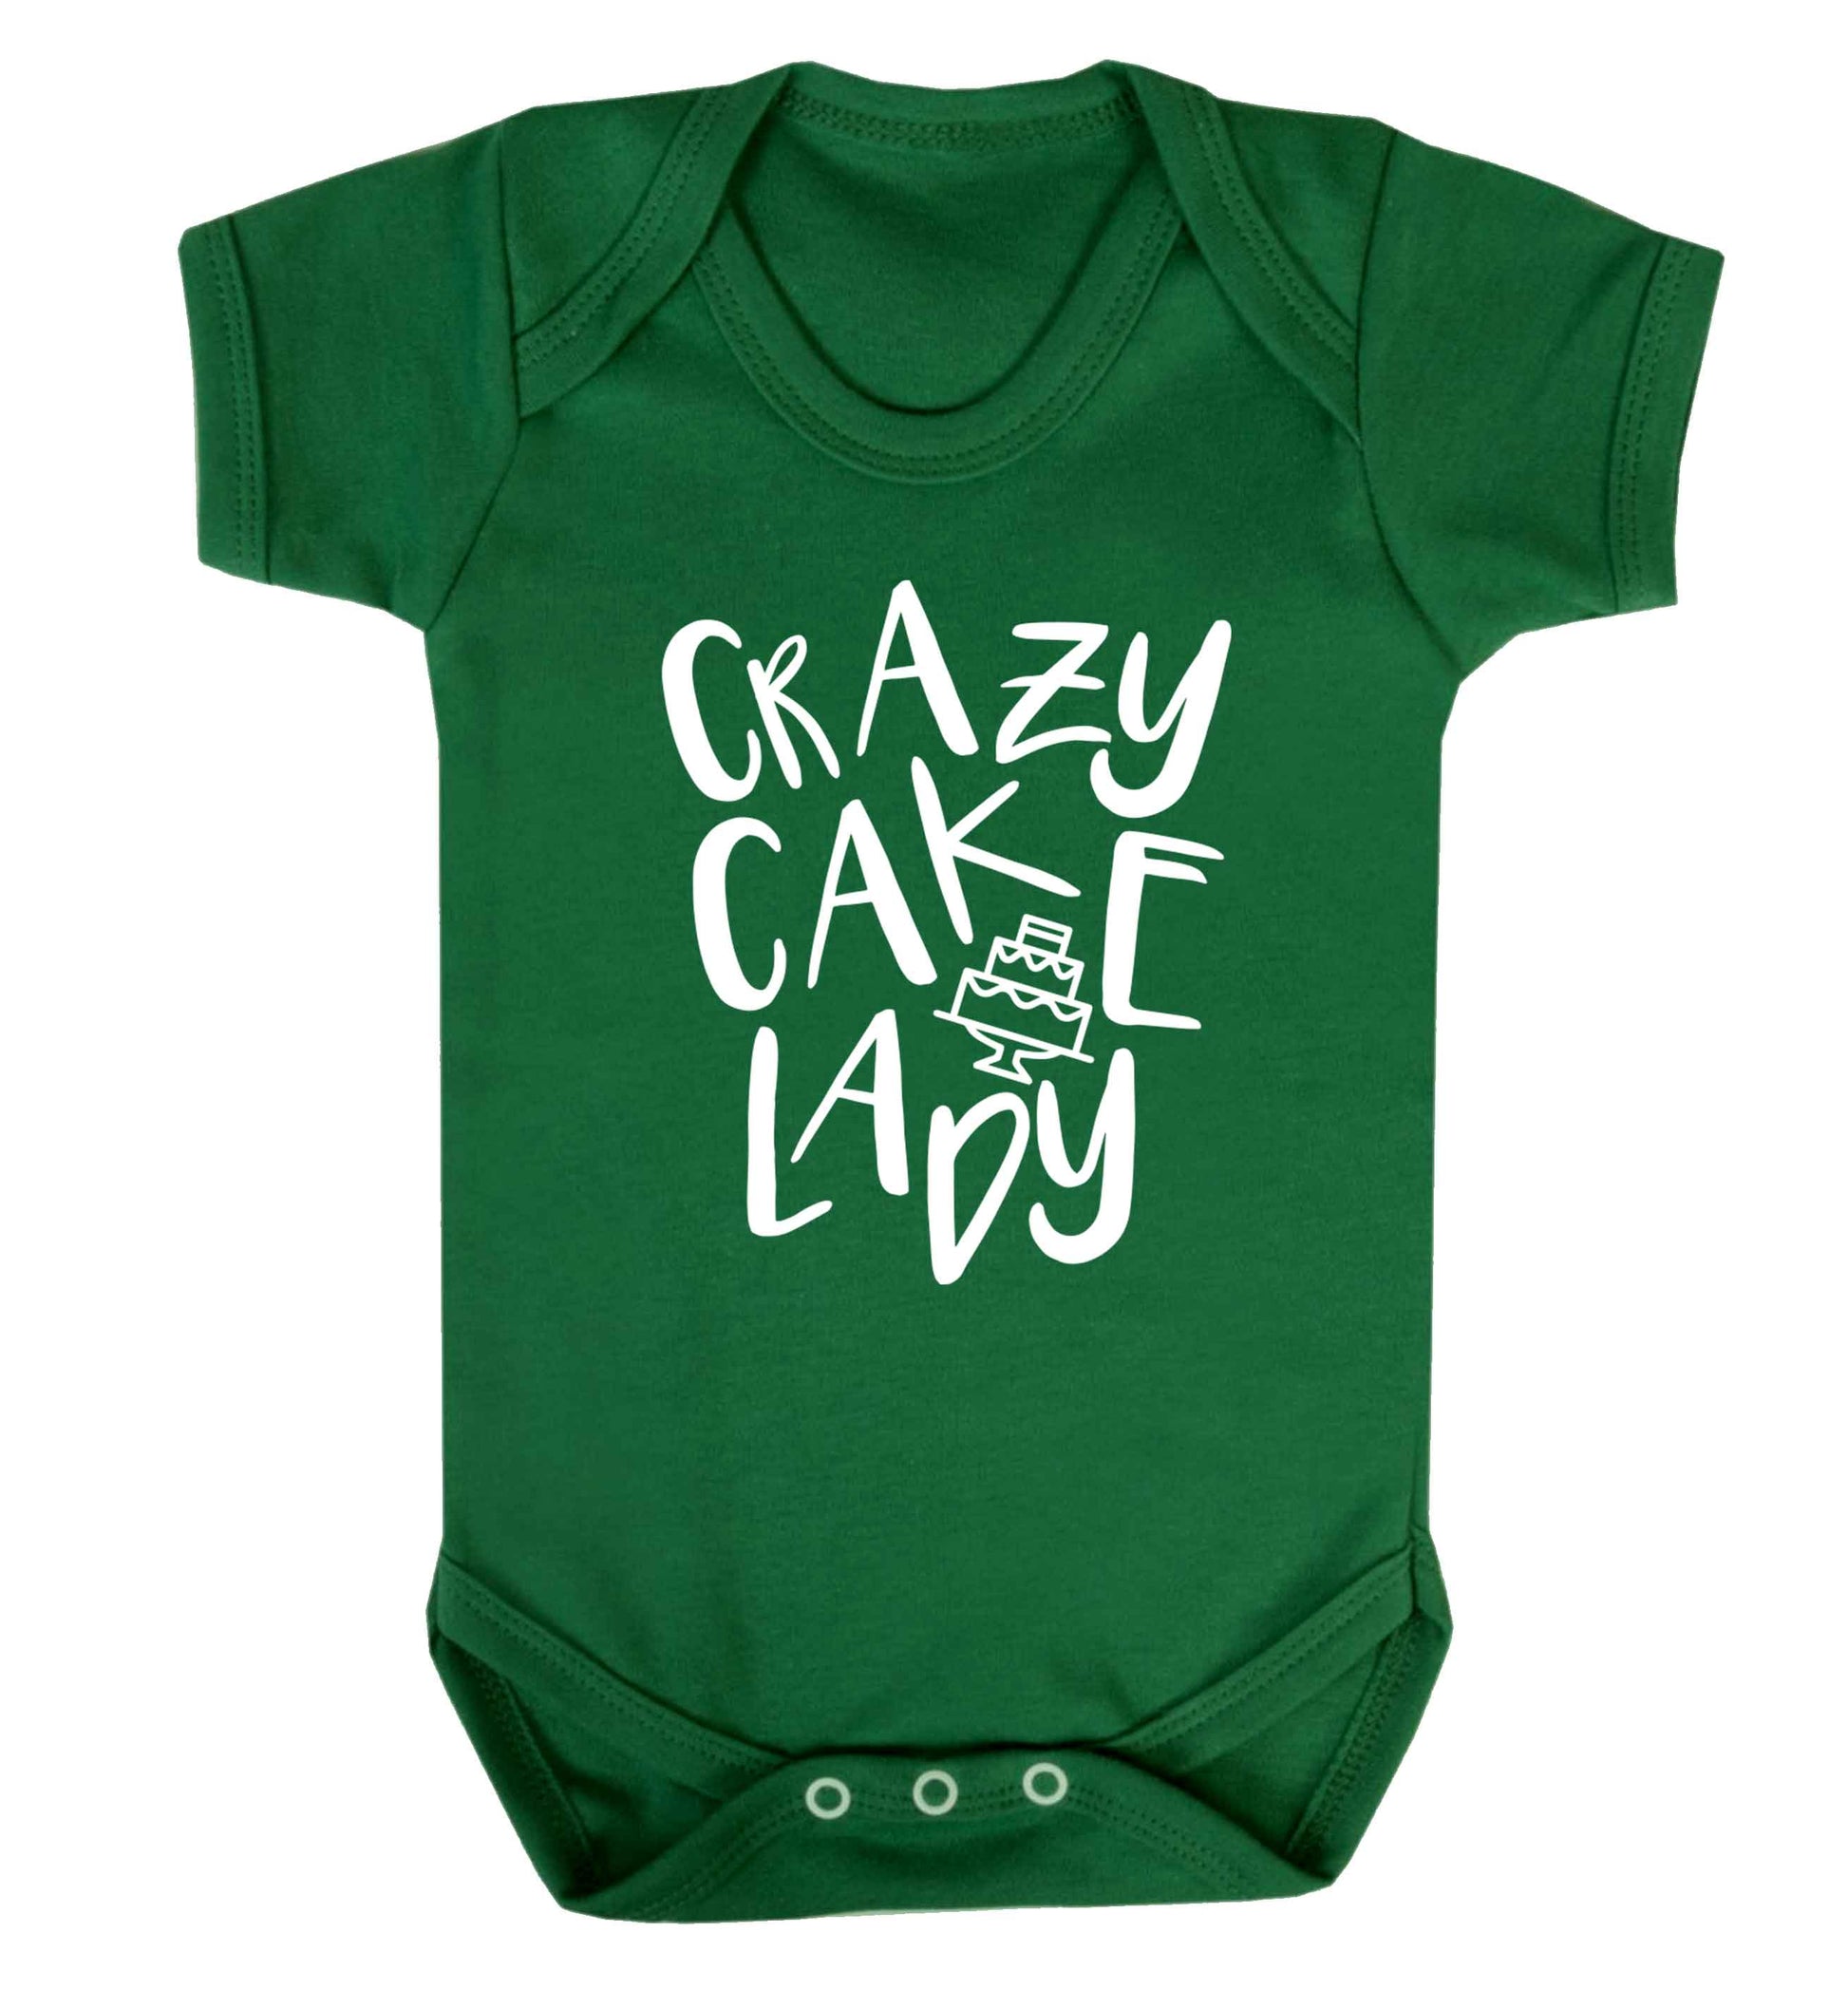 Crazy cake lady Baby Vest green 18-24 months